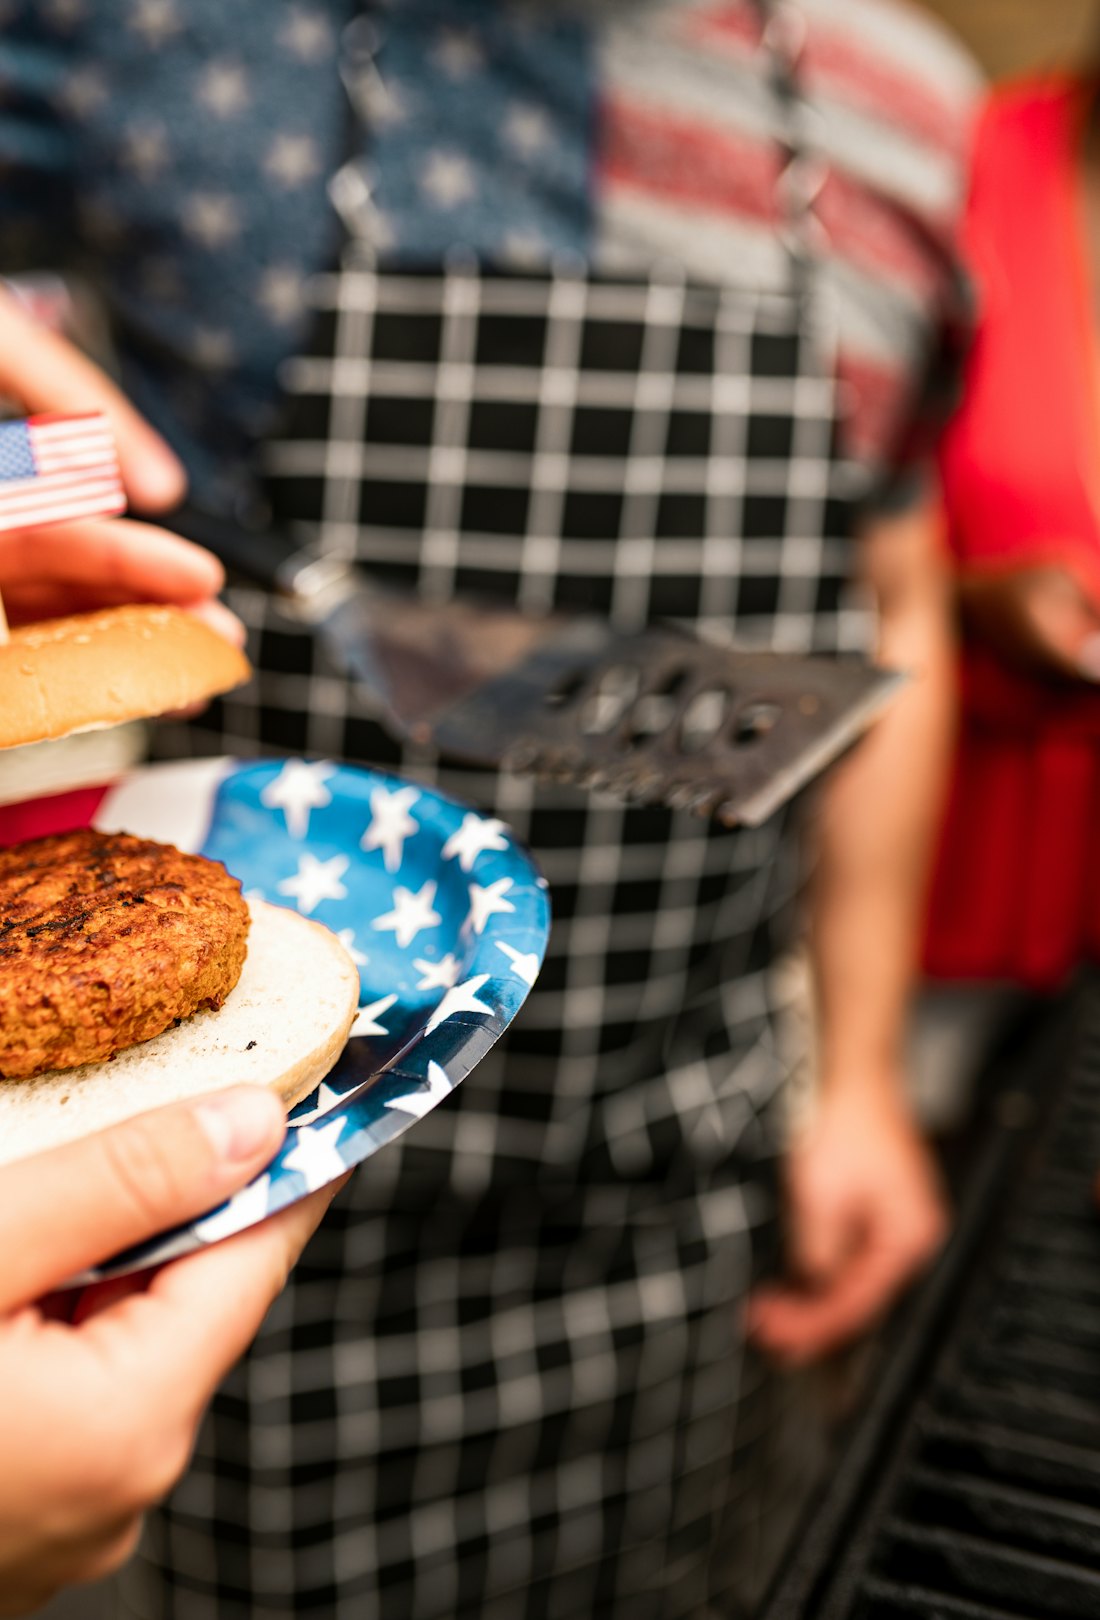 Burgers, hot dogs, and more kid-friendly recipes are available to put on the grill this Memorial Day...